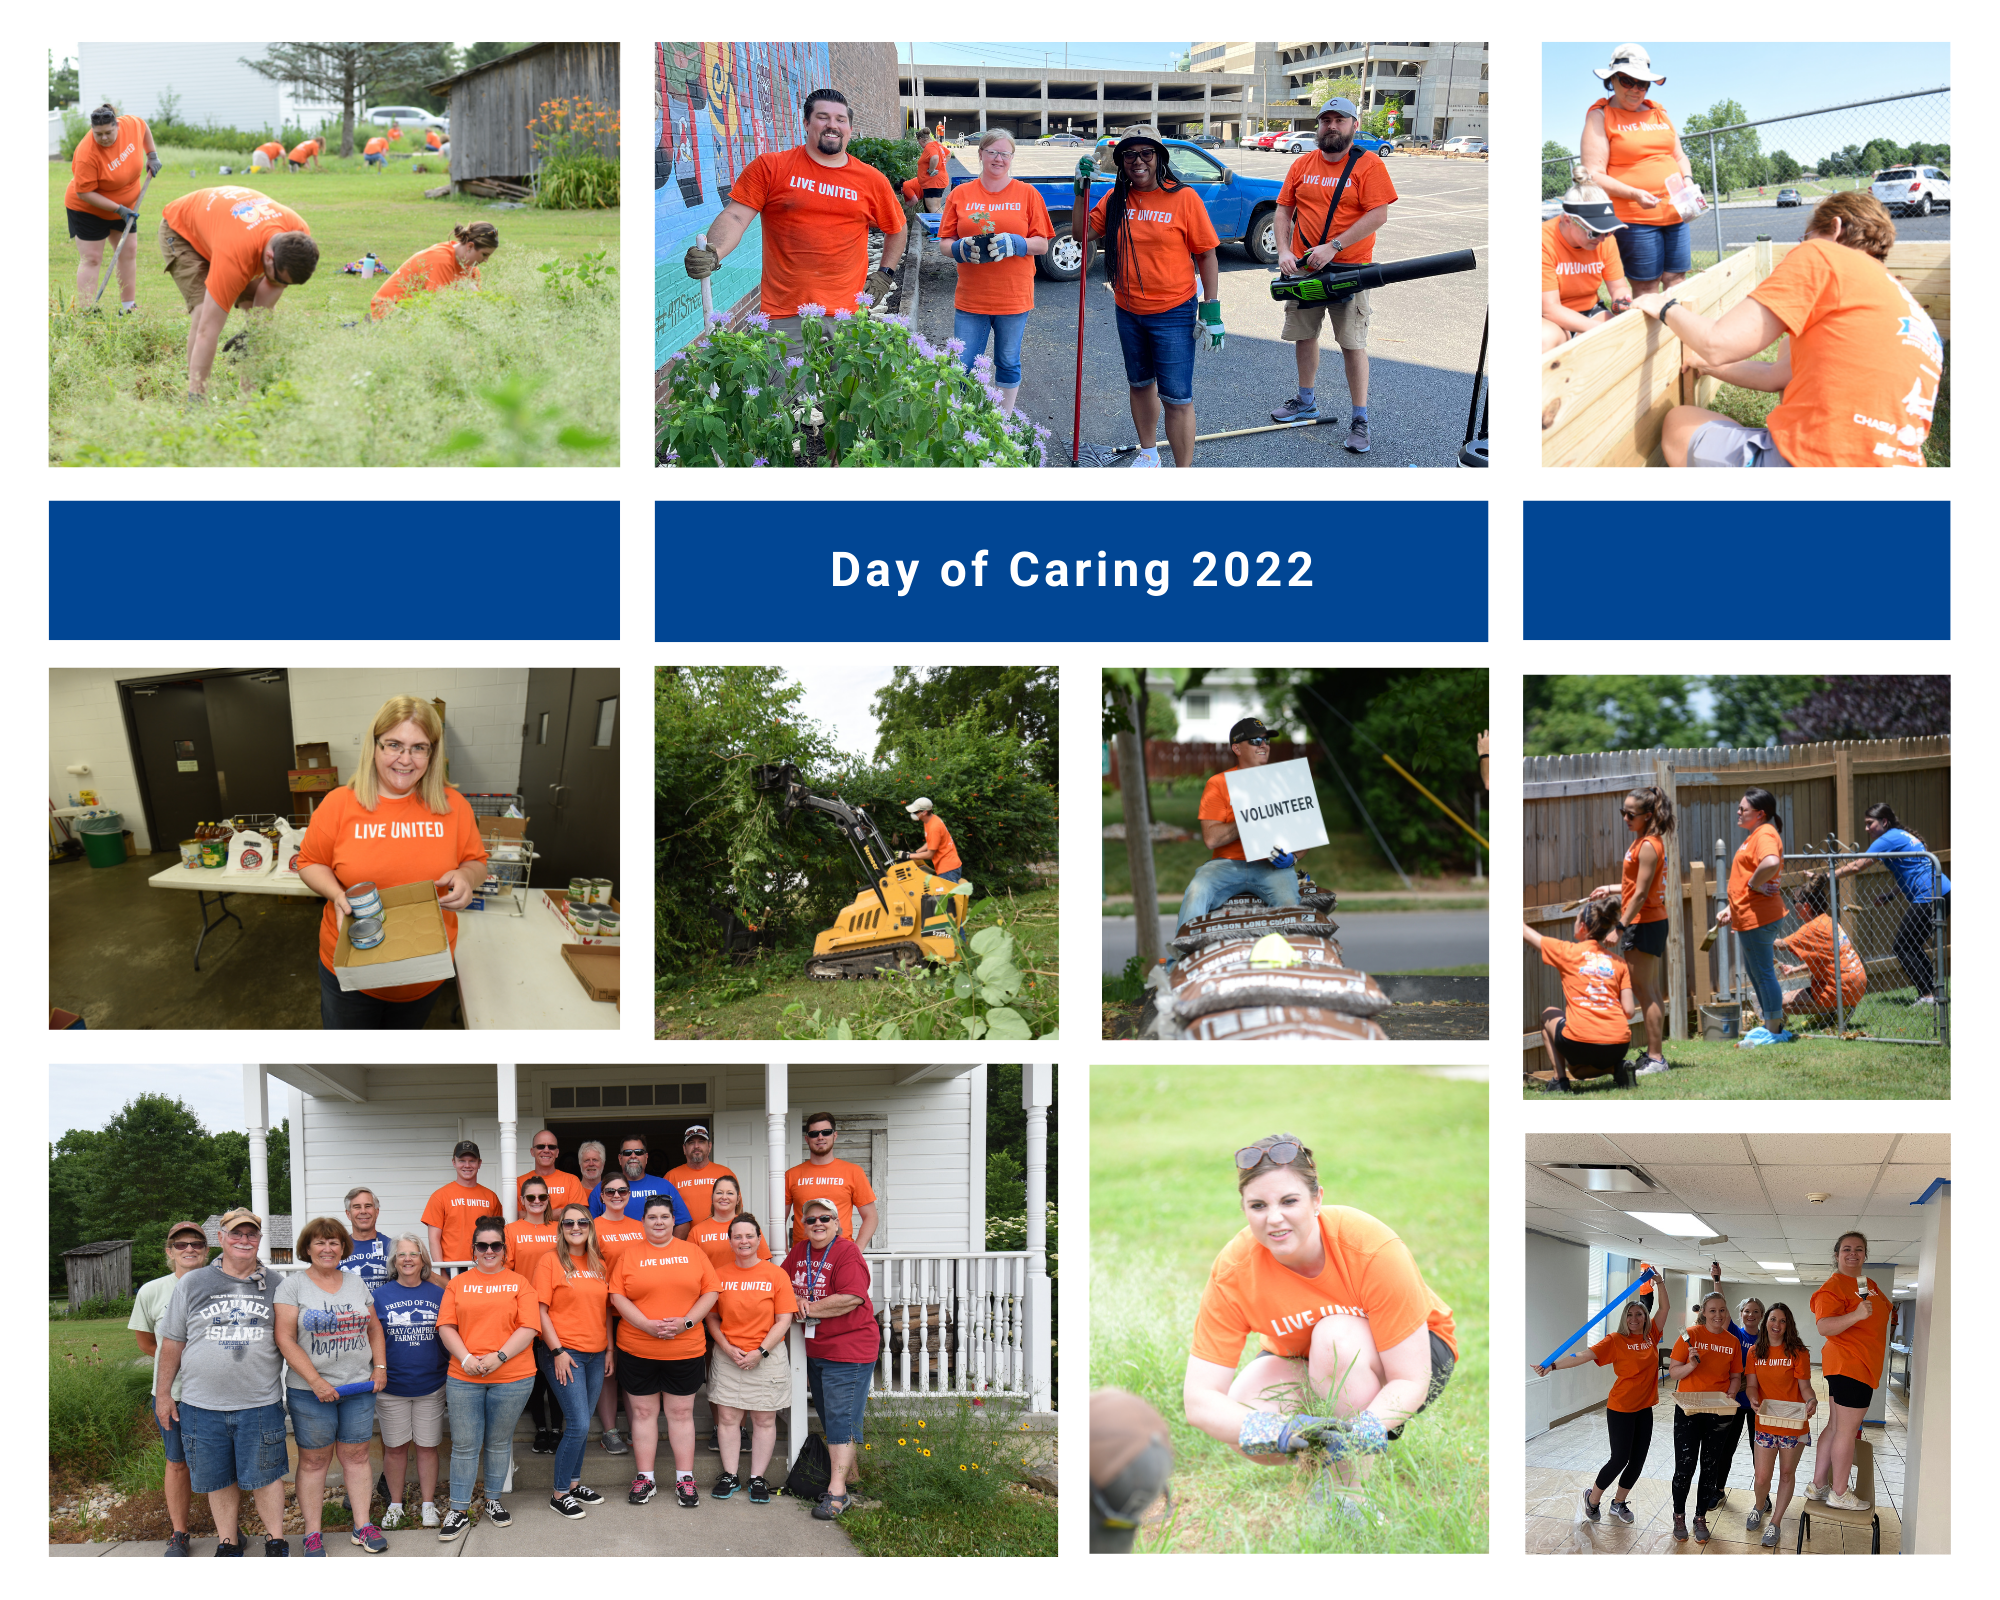 Day of Caring volunteers